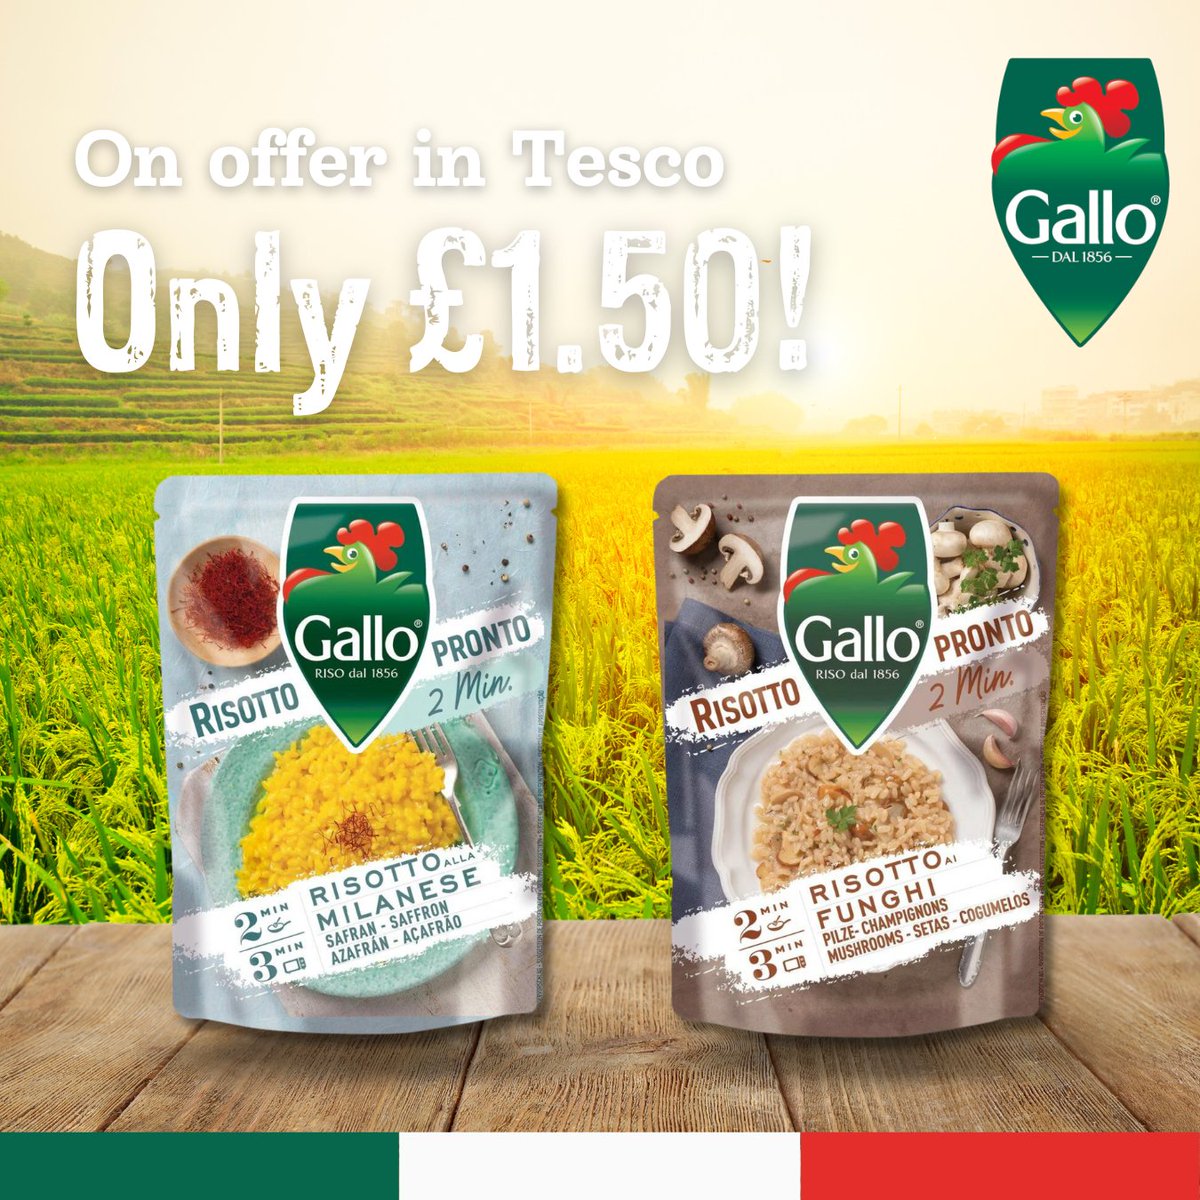 Risotto in minutes? Yes please! 😍 Our Risotto Pronto pouches are on offer in @tesco for only £1.50 with Clubcard. #supermarketoffer #supermarket #supermarketdeal #tesco #tescofood #tescooffer #offerintesco #RisoGallo